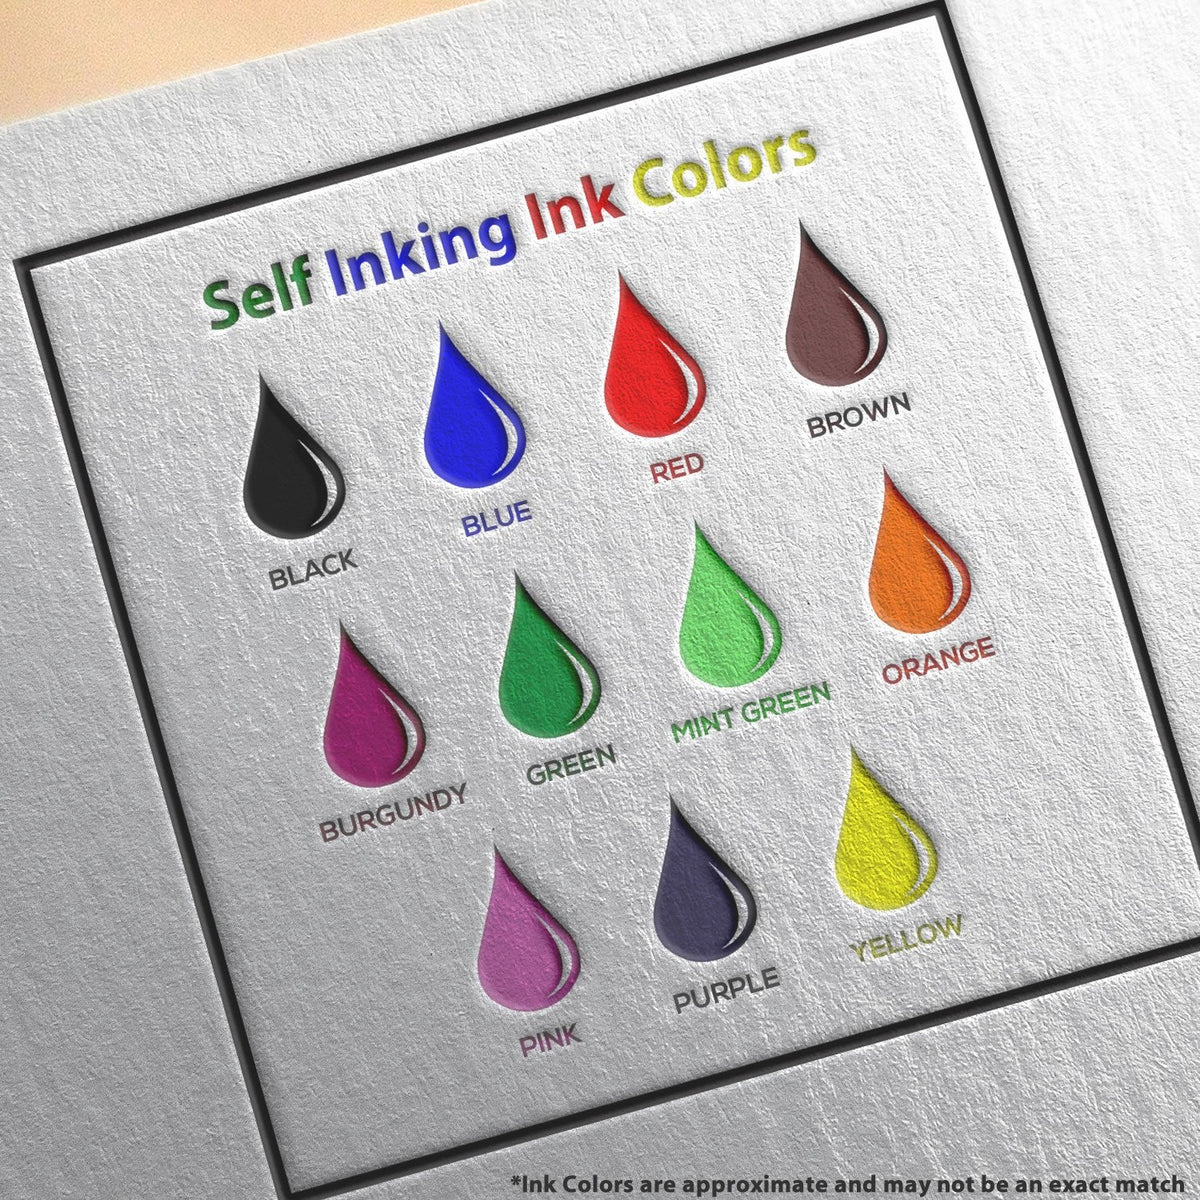 Self-Inking Perishable Stamp Ink Color Options